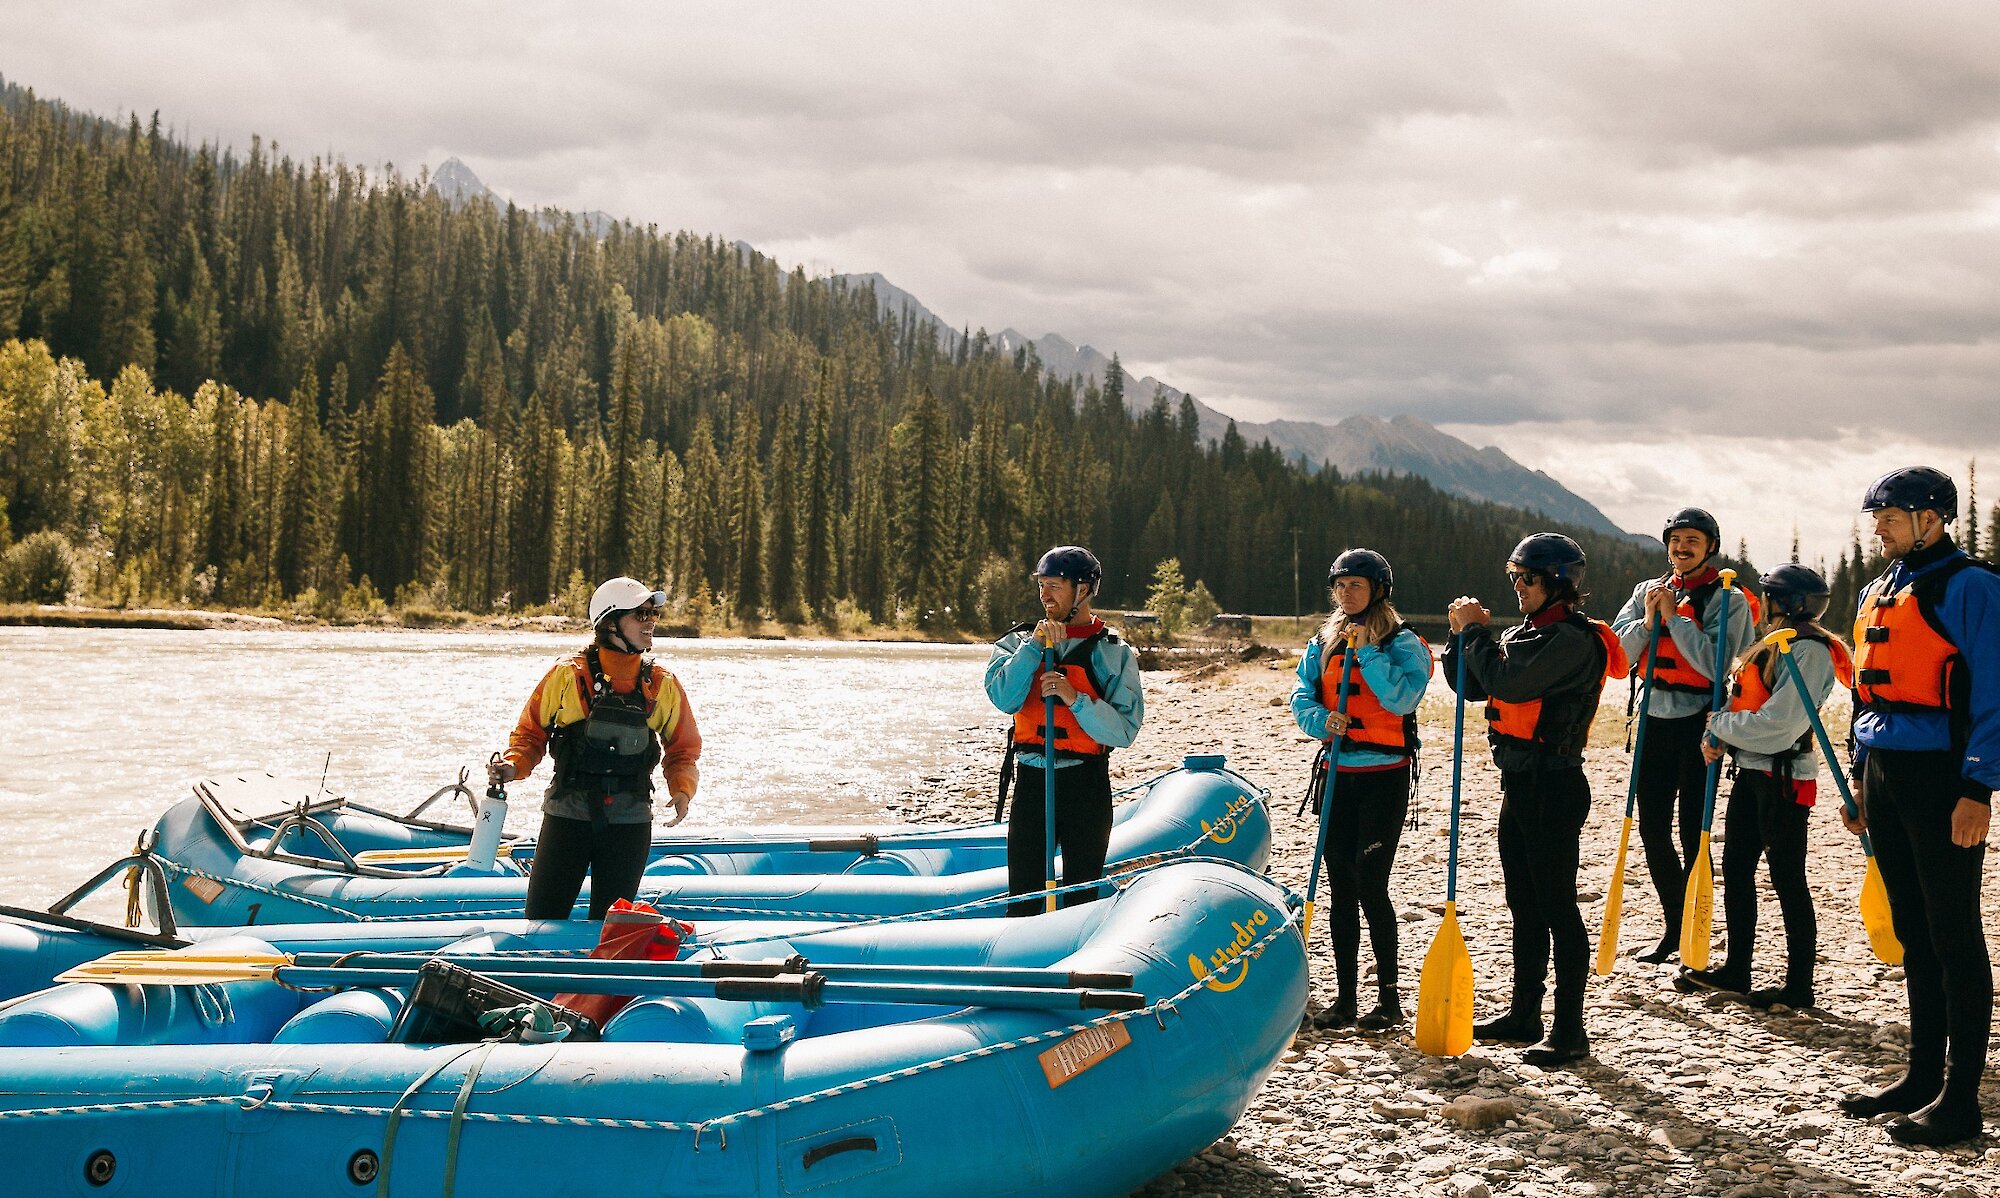 Rafters getting instruction on the Kicking Horse River